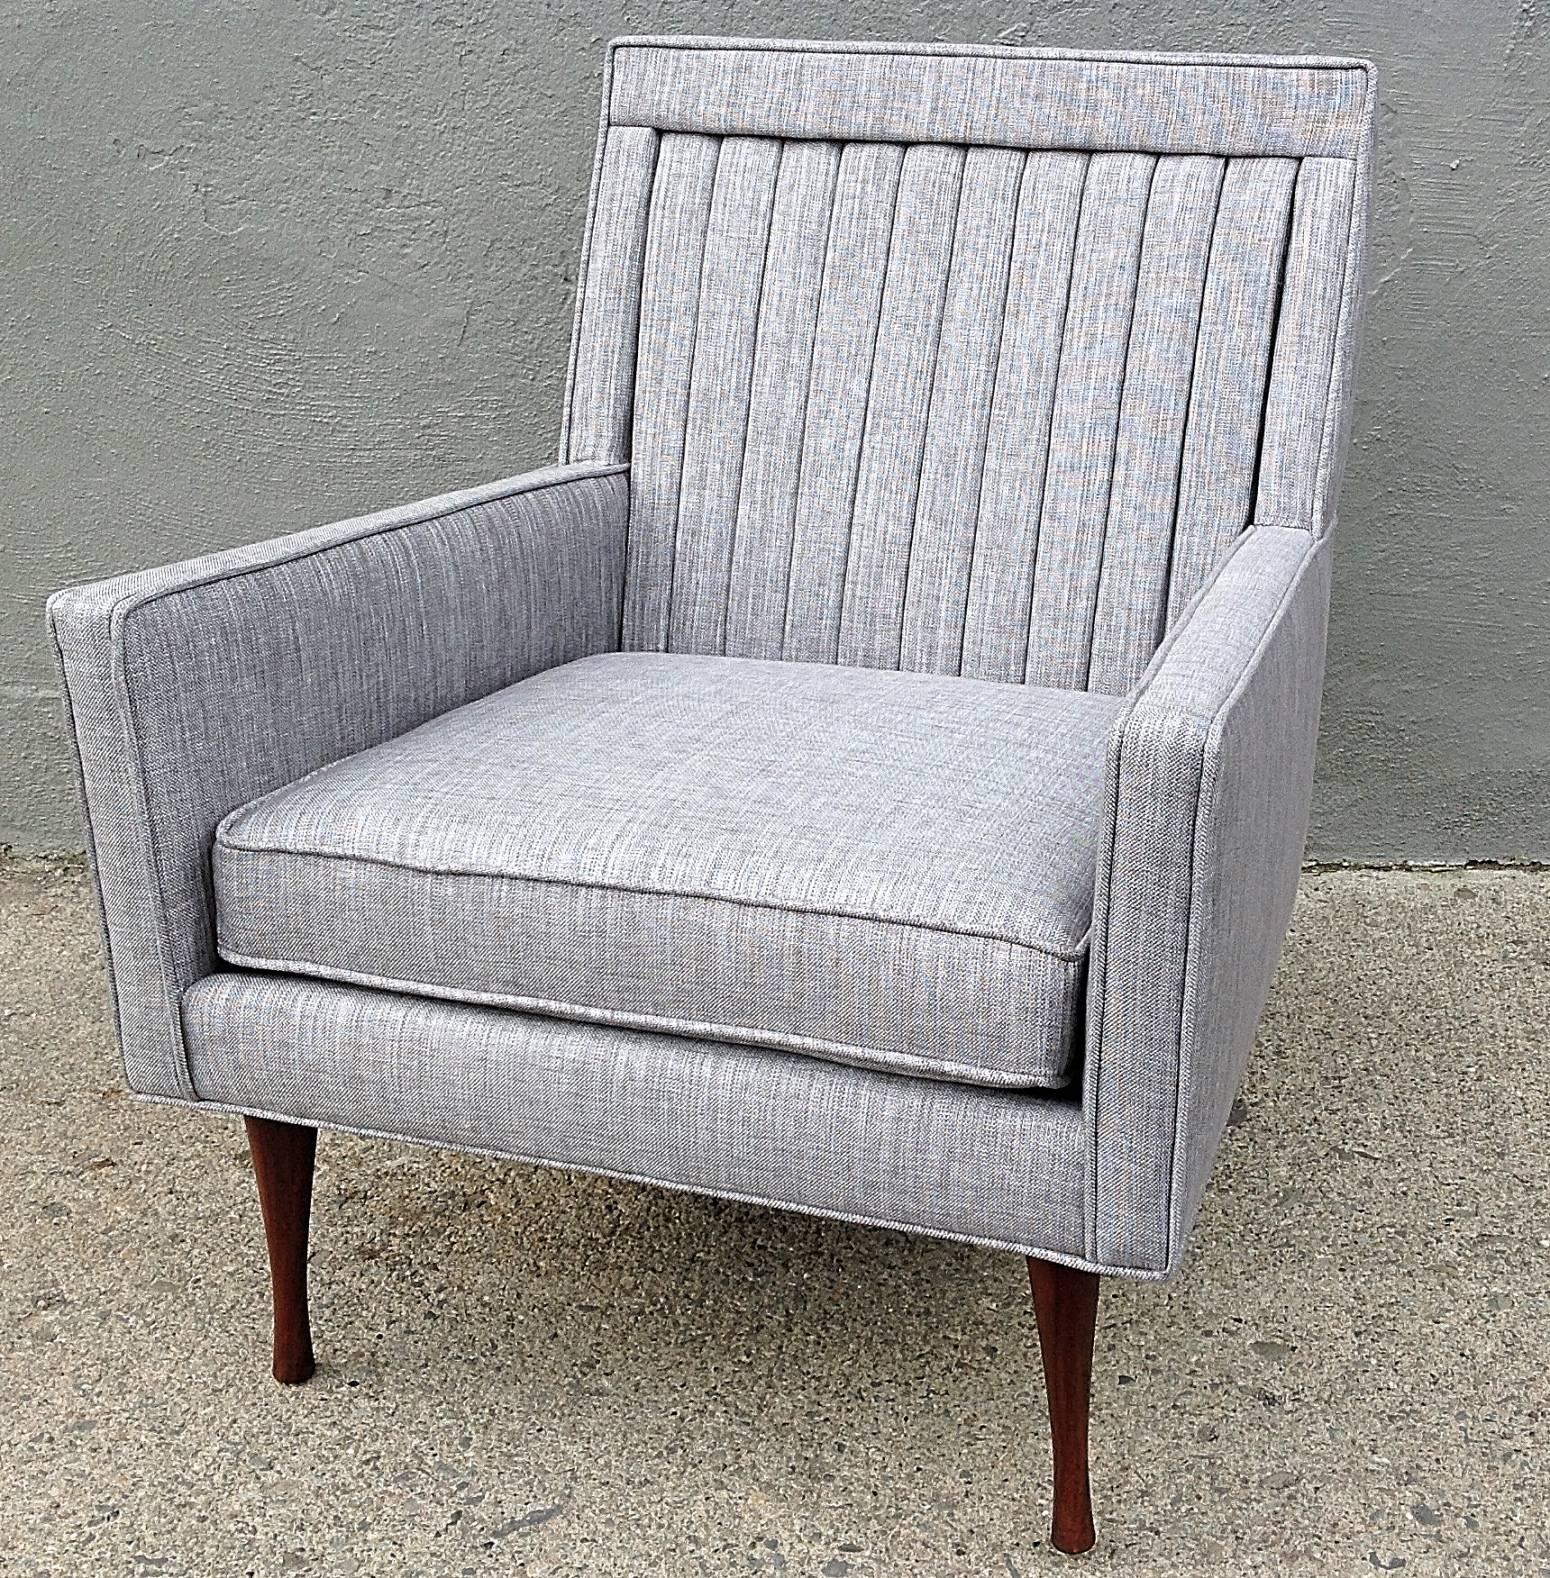 Symmetric Lounge Chair Paul McCobb for Widdicomb In Excellent Condition For Sale In Hudson, NY